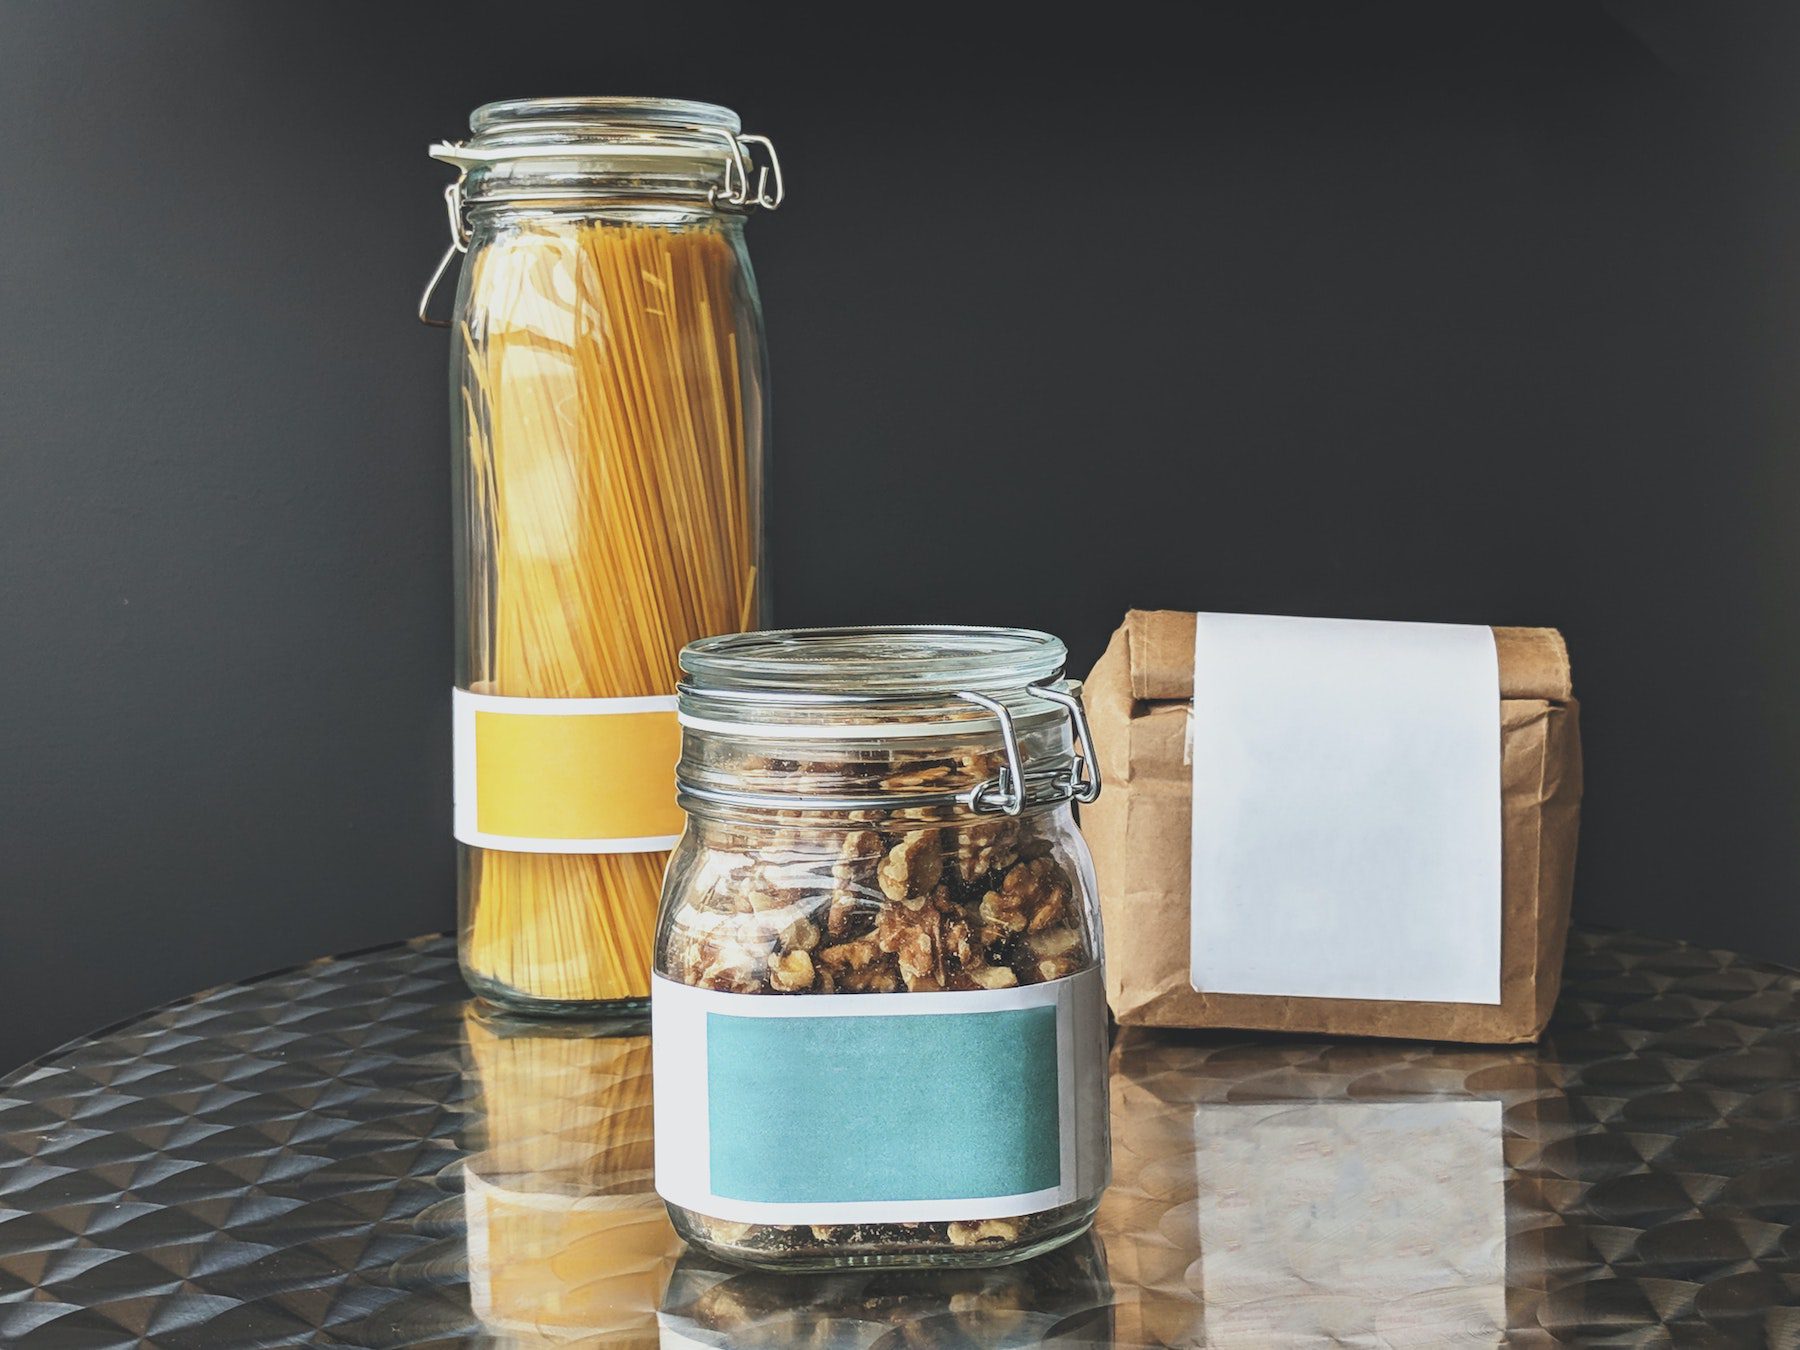 Uncooked pasta, walnuts are kept in separate glass jars next to a folded brown paper bag on top of a metal table